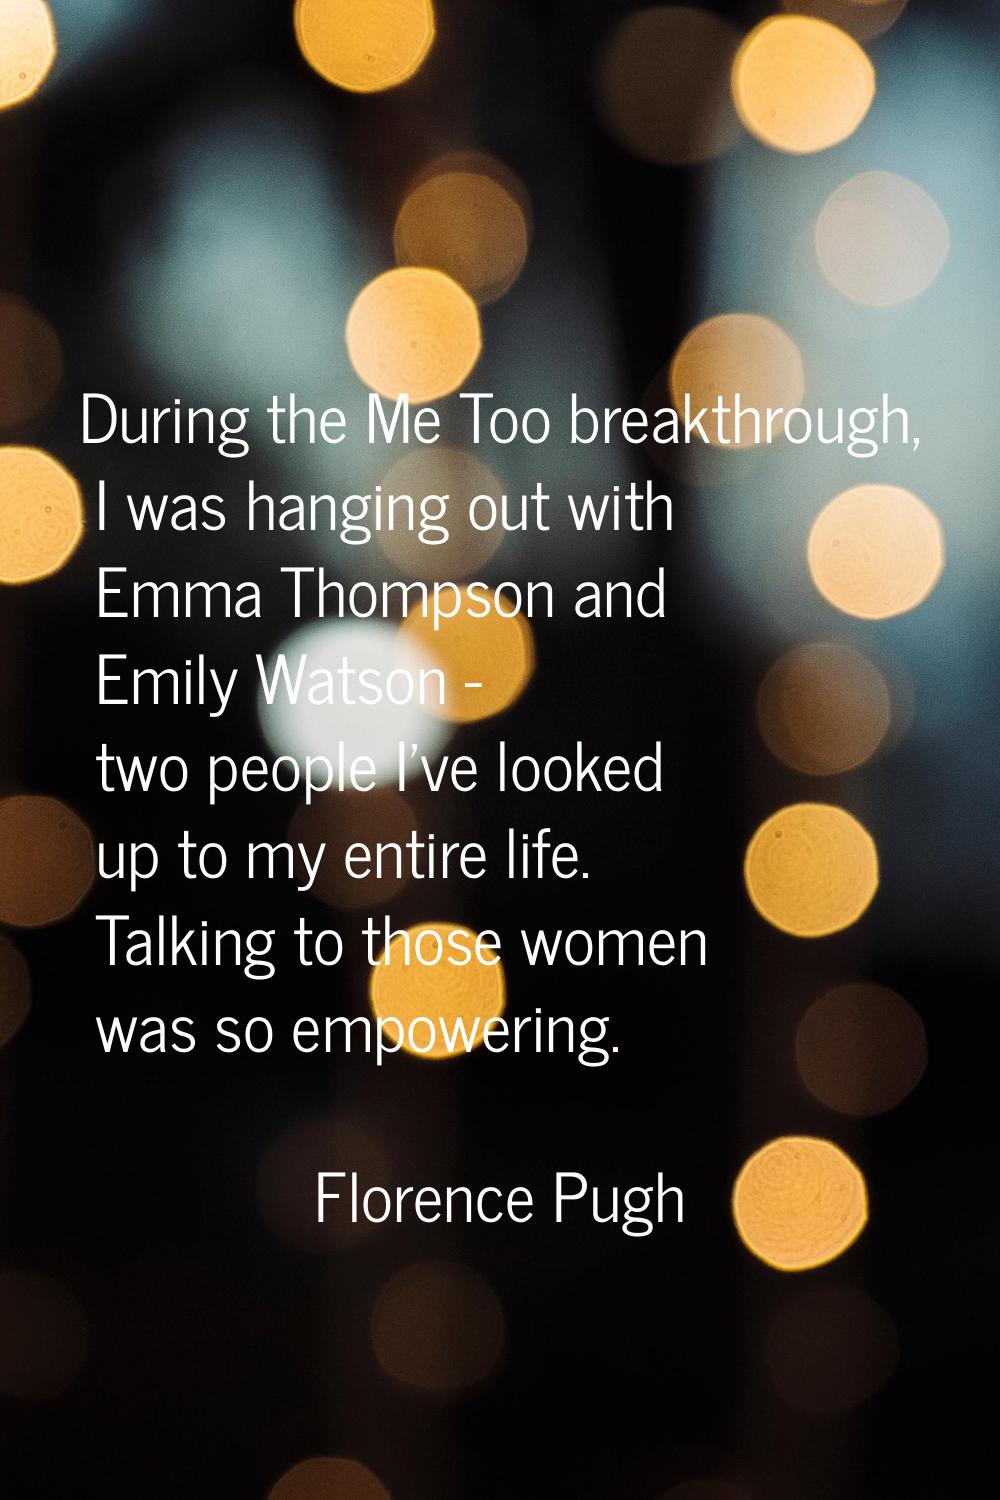 During the Me Too breakthrough, I was hanging out with Emma Thompson and Emily Watson - two people 